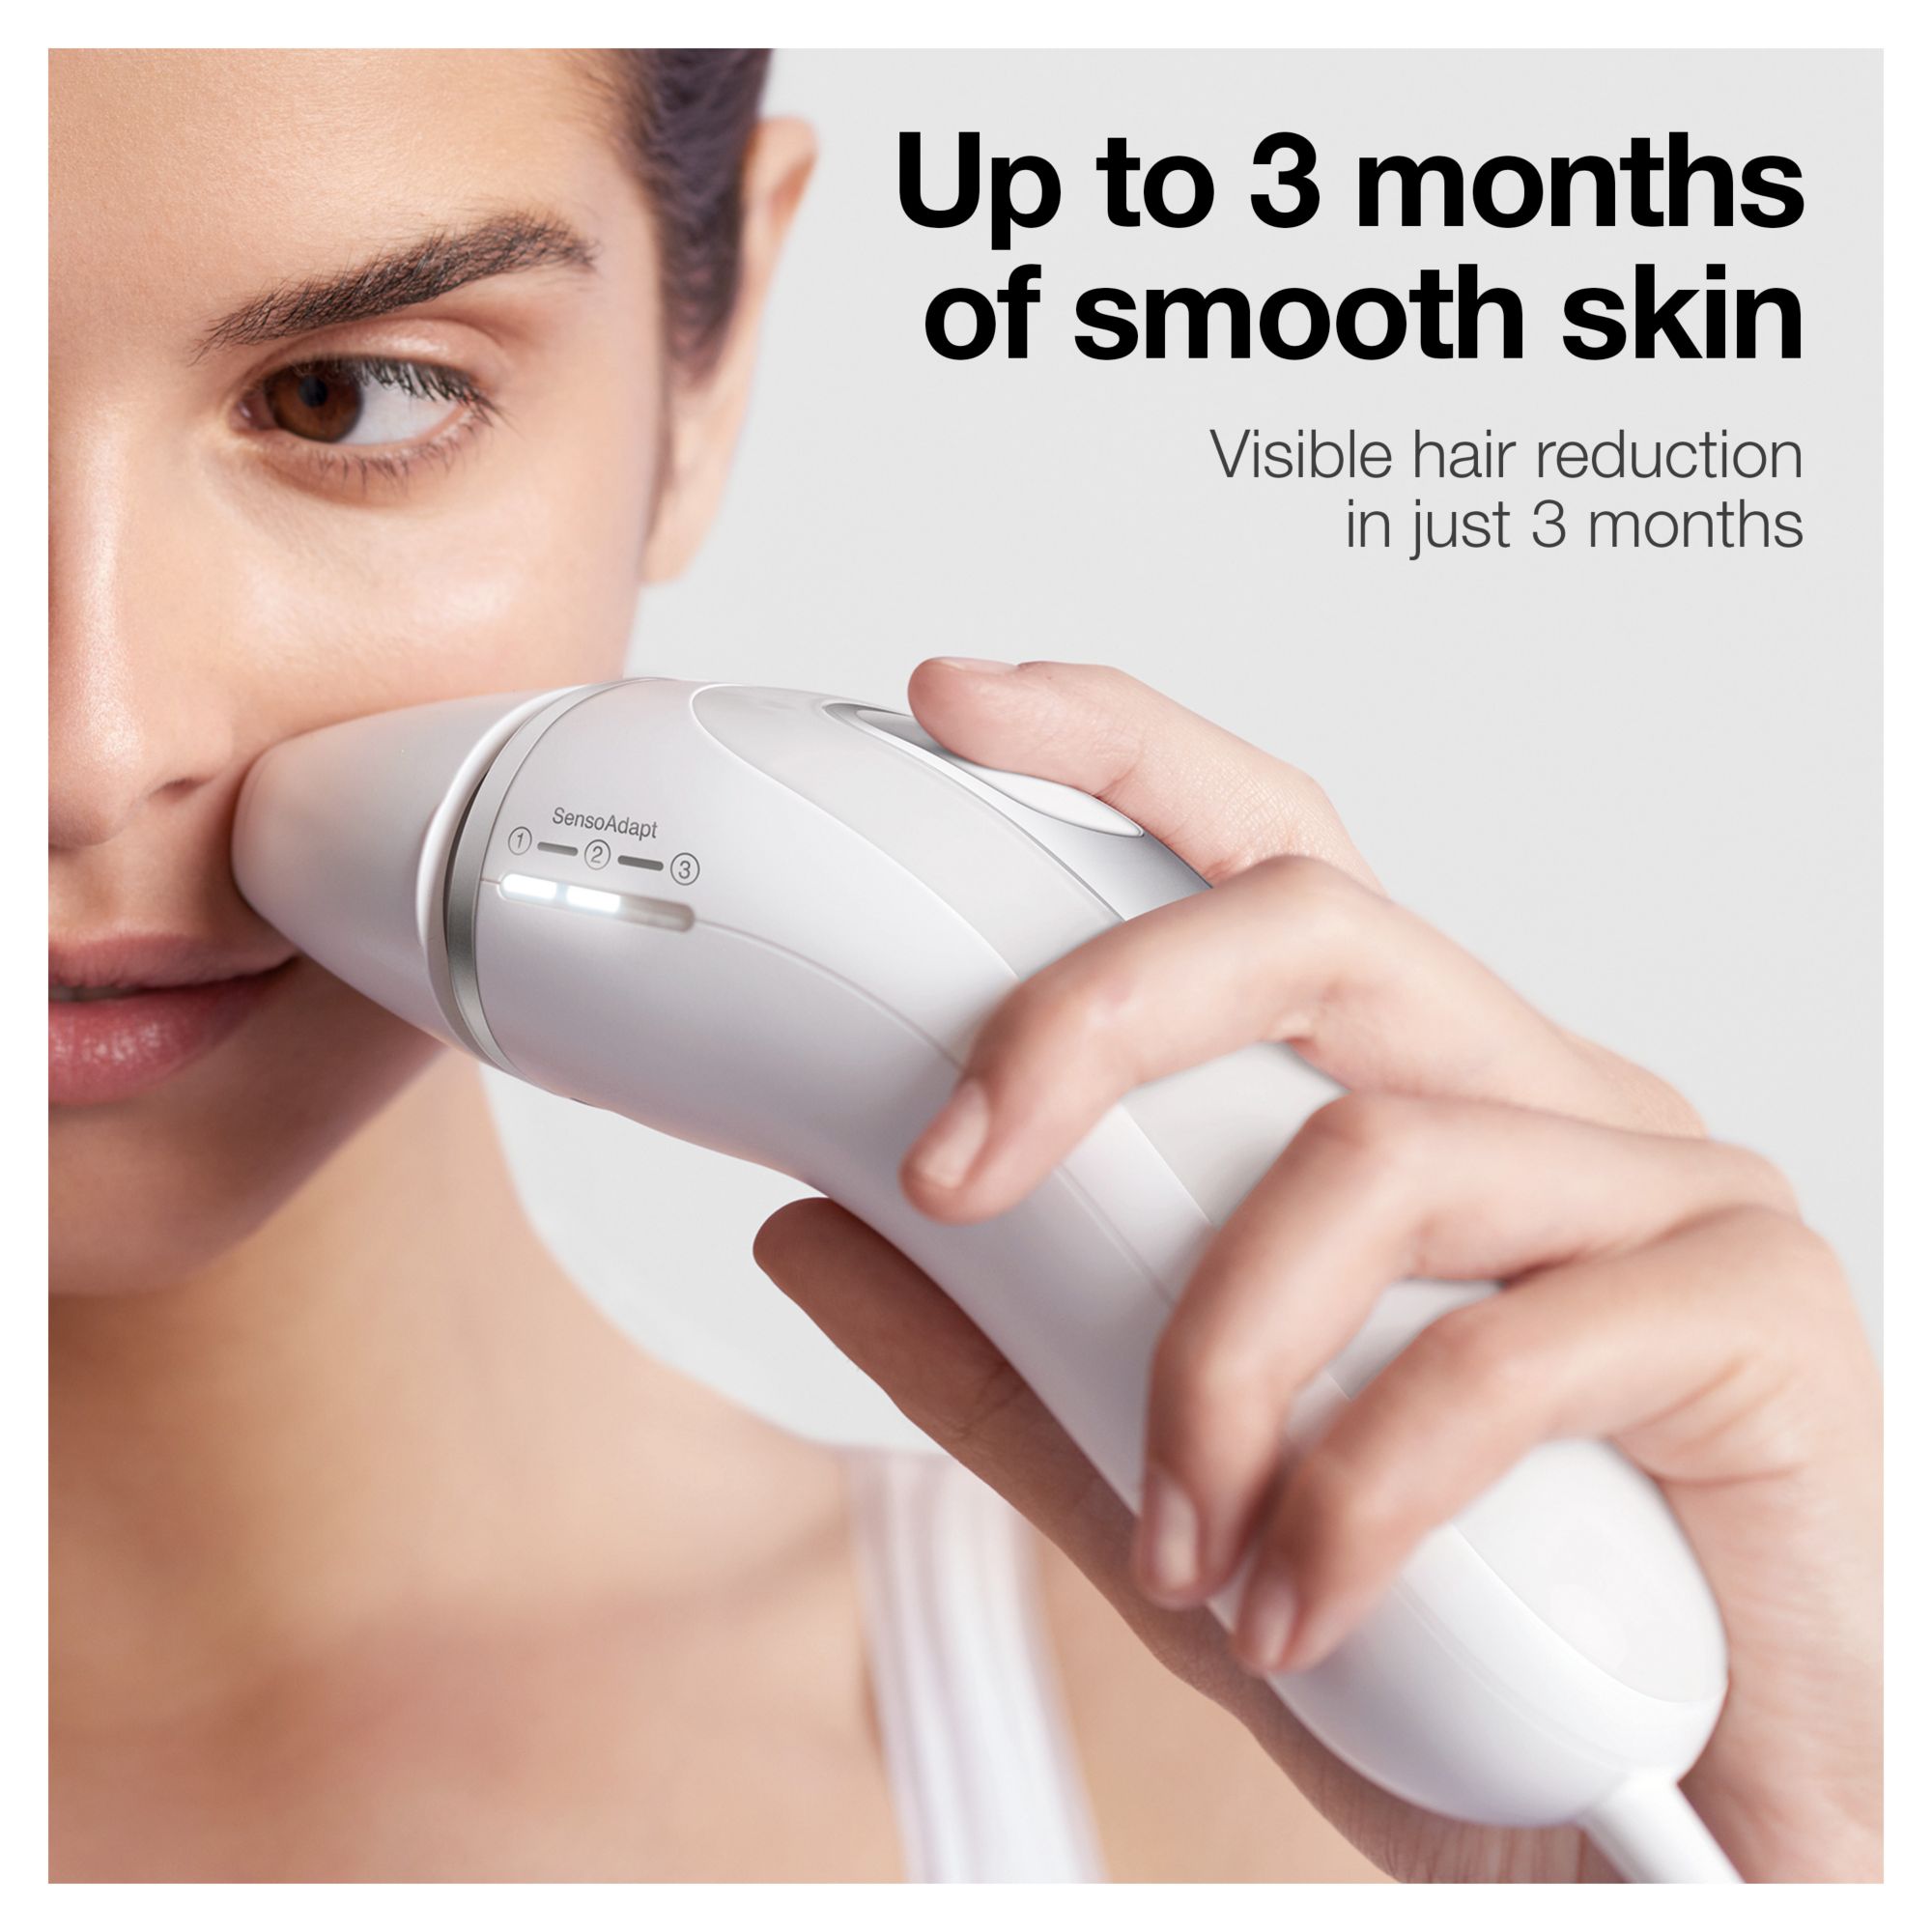  Customer reviews: Braun Silk Expert Pro5 IPL Hair Removal  Device for Women & Men - Lasting Hair Regrowth Reduction, Virtually  Painless Alternative to Salon Laser Removal